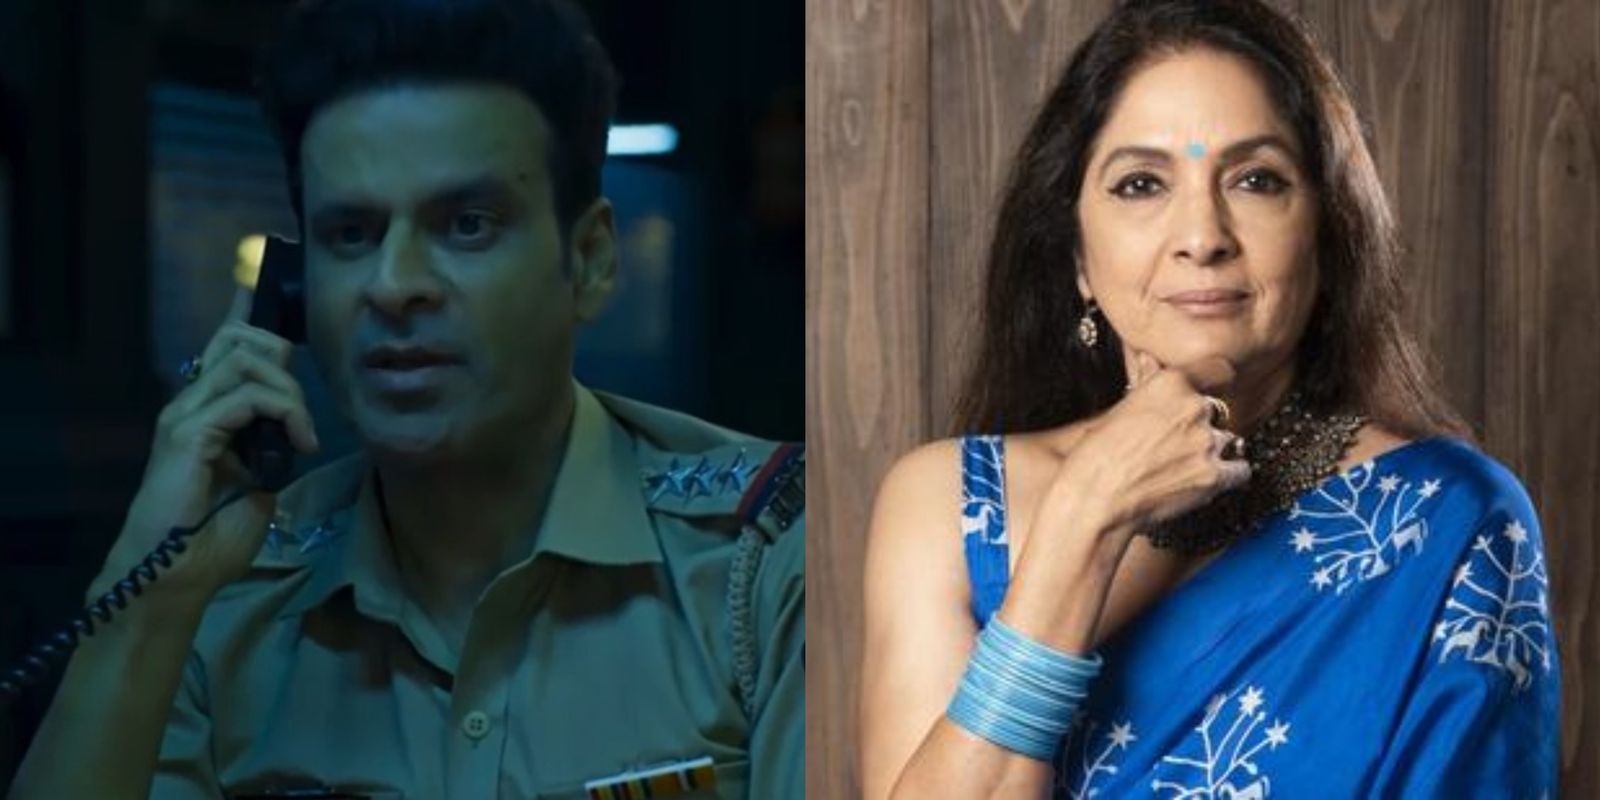 Manoj Bajpayee reveals what makes Dial 100 co-star Neena Gupta’s work ‘adorable and impactful’